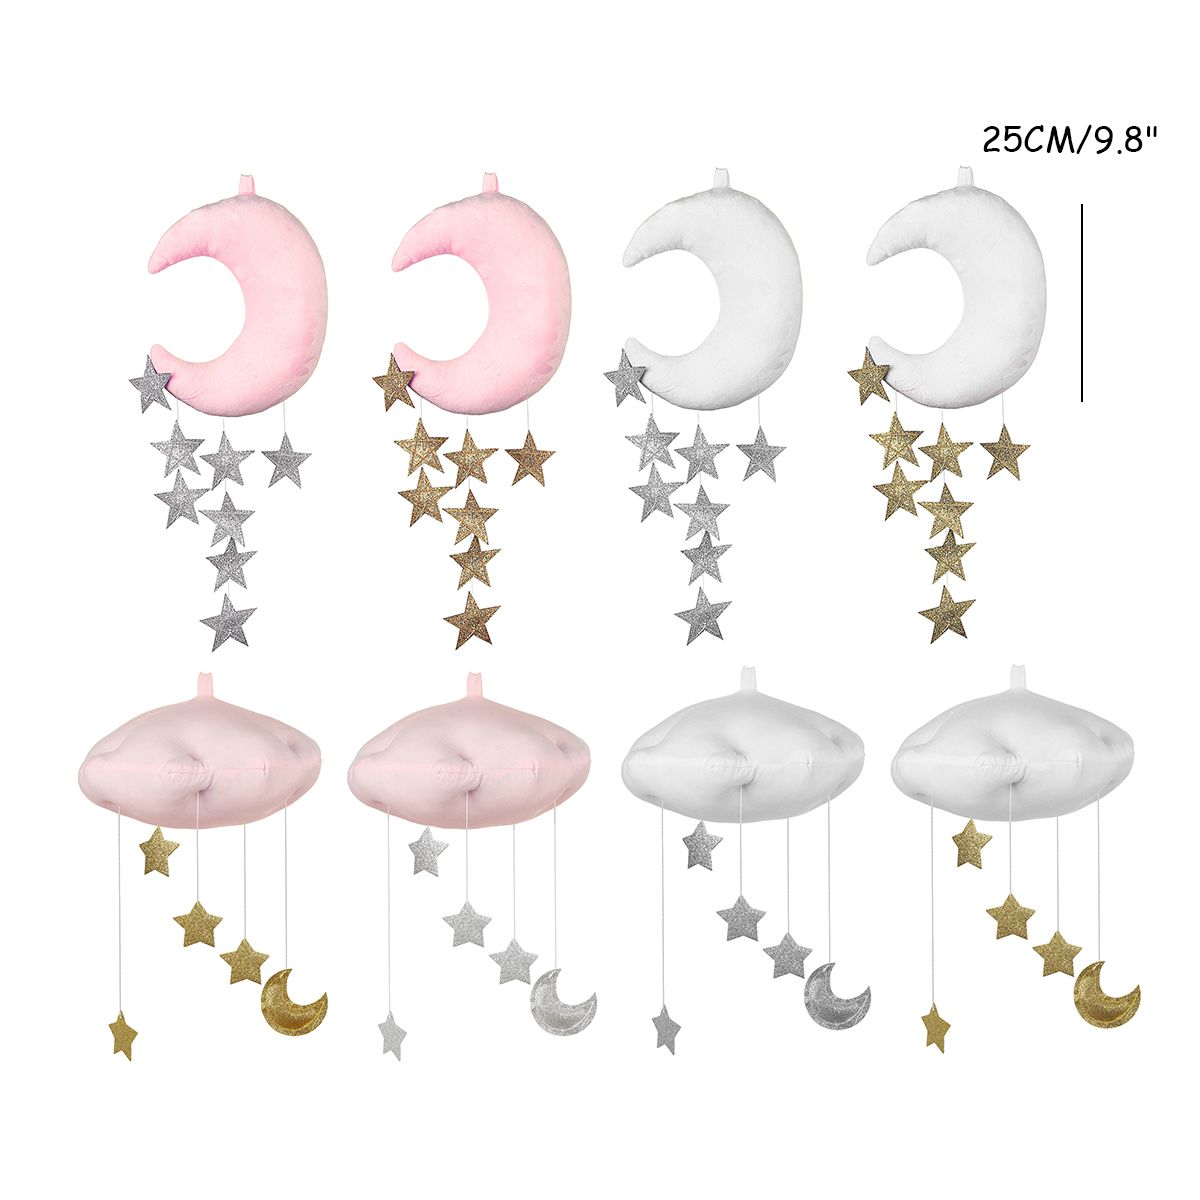 White-Pink-Moon-Cloud-And-Star-Baby-Bed-Hanging-Room-Decorations-Accessories-Nursery-Decor-Drop-1490560